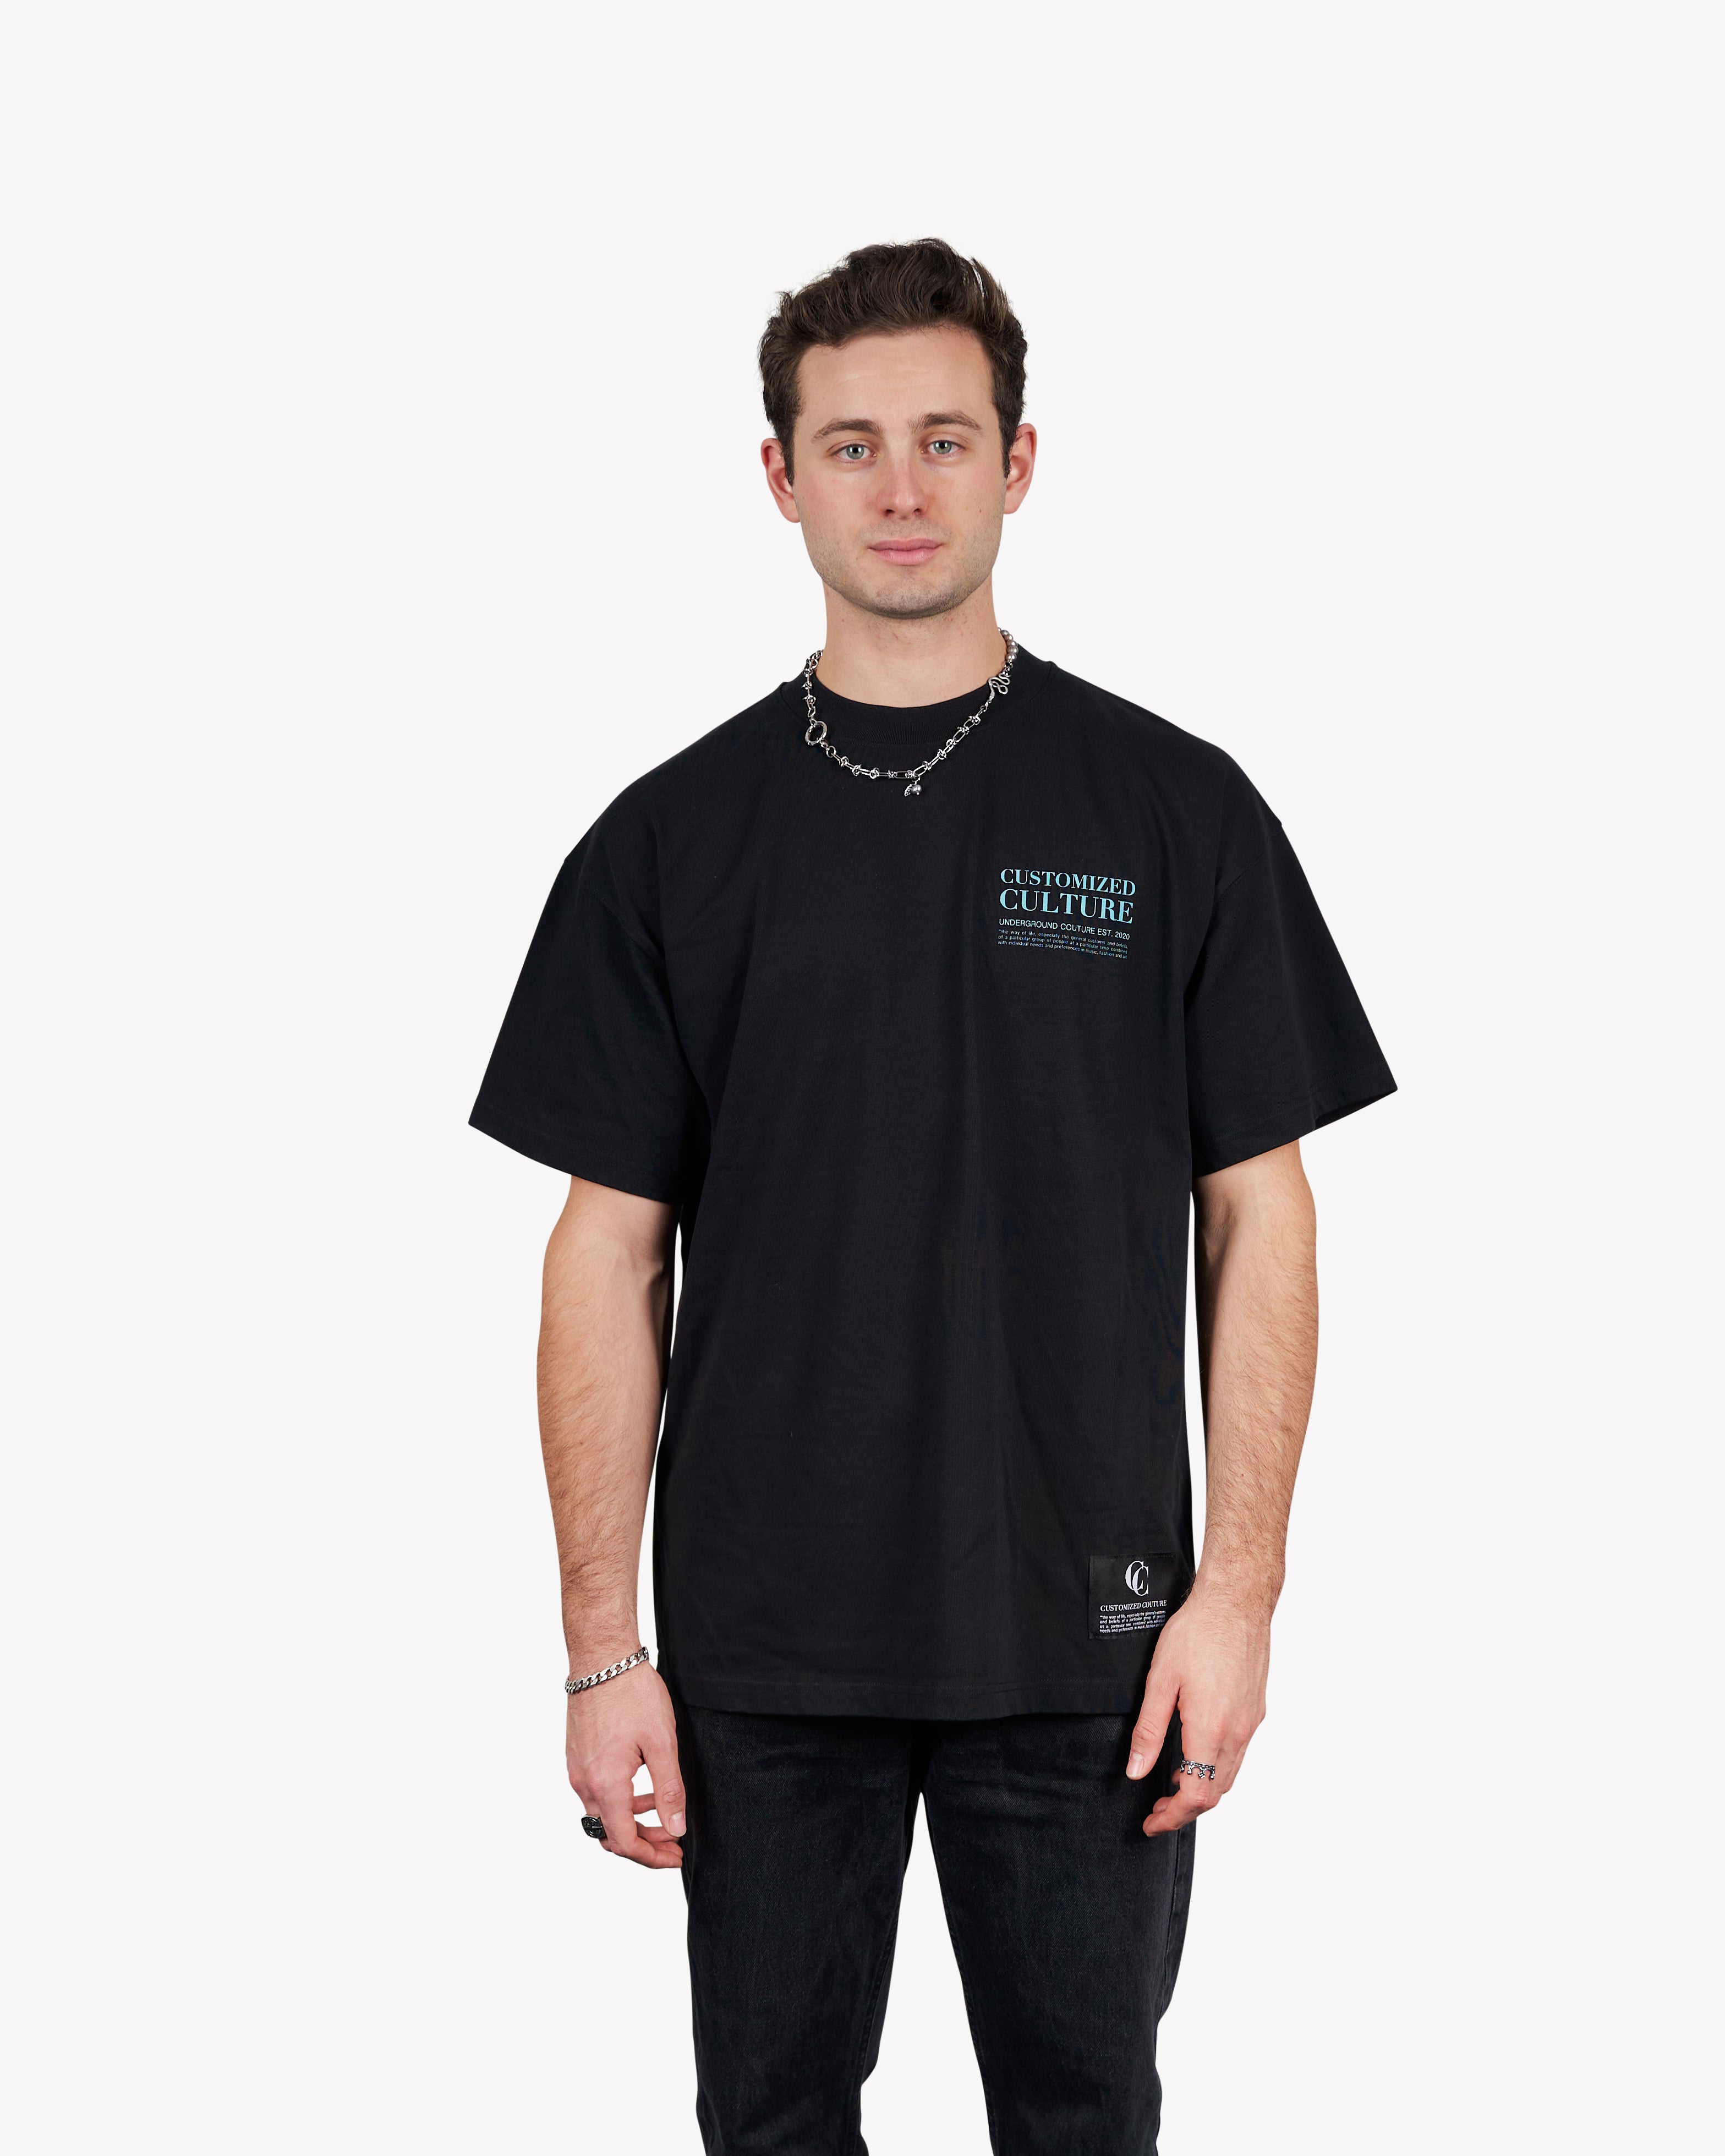 Afterparty in Paradise 2.0 T-Shirt